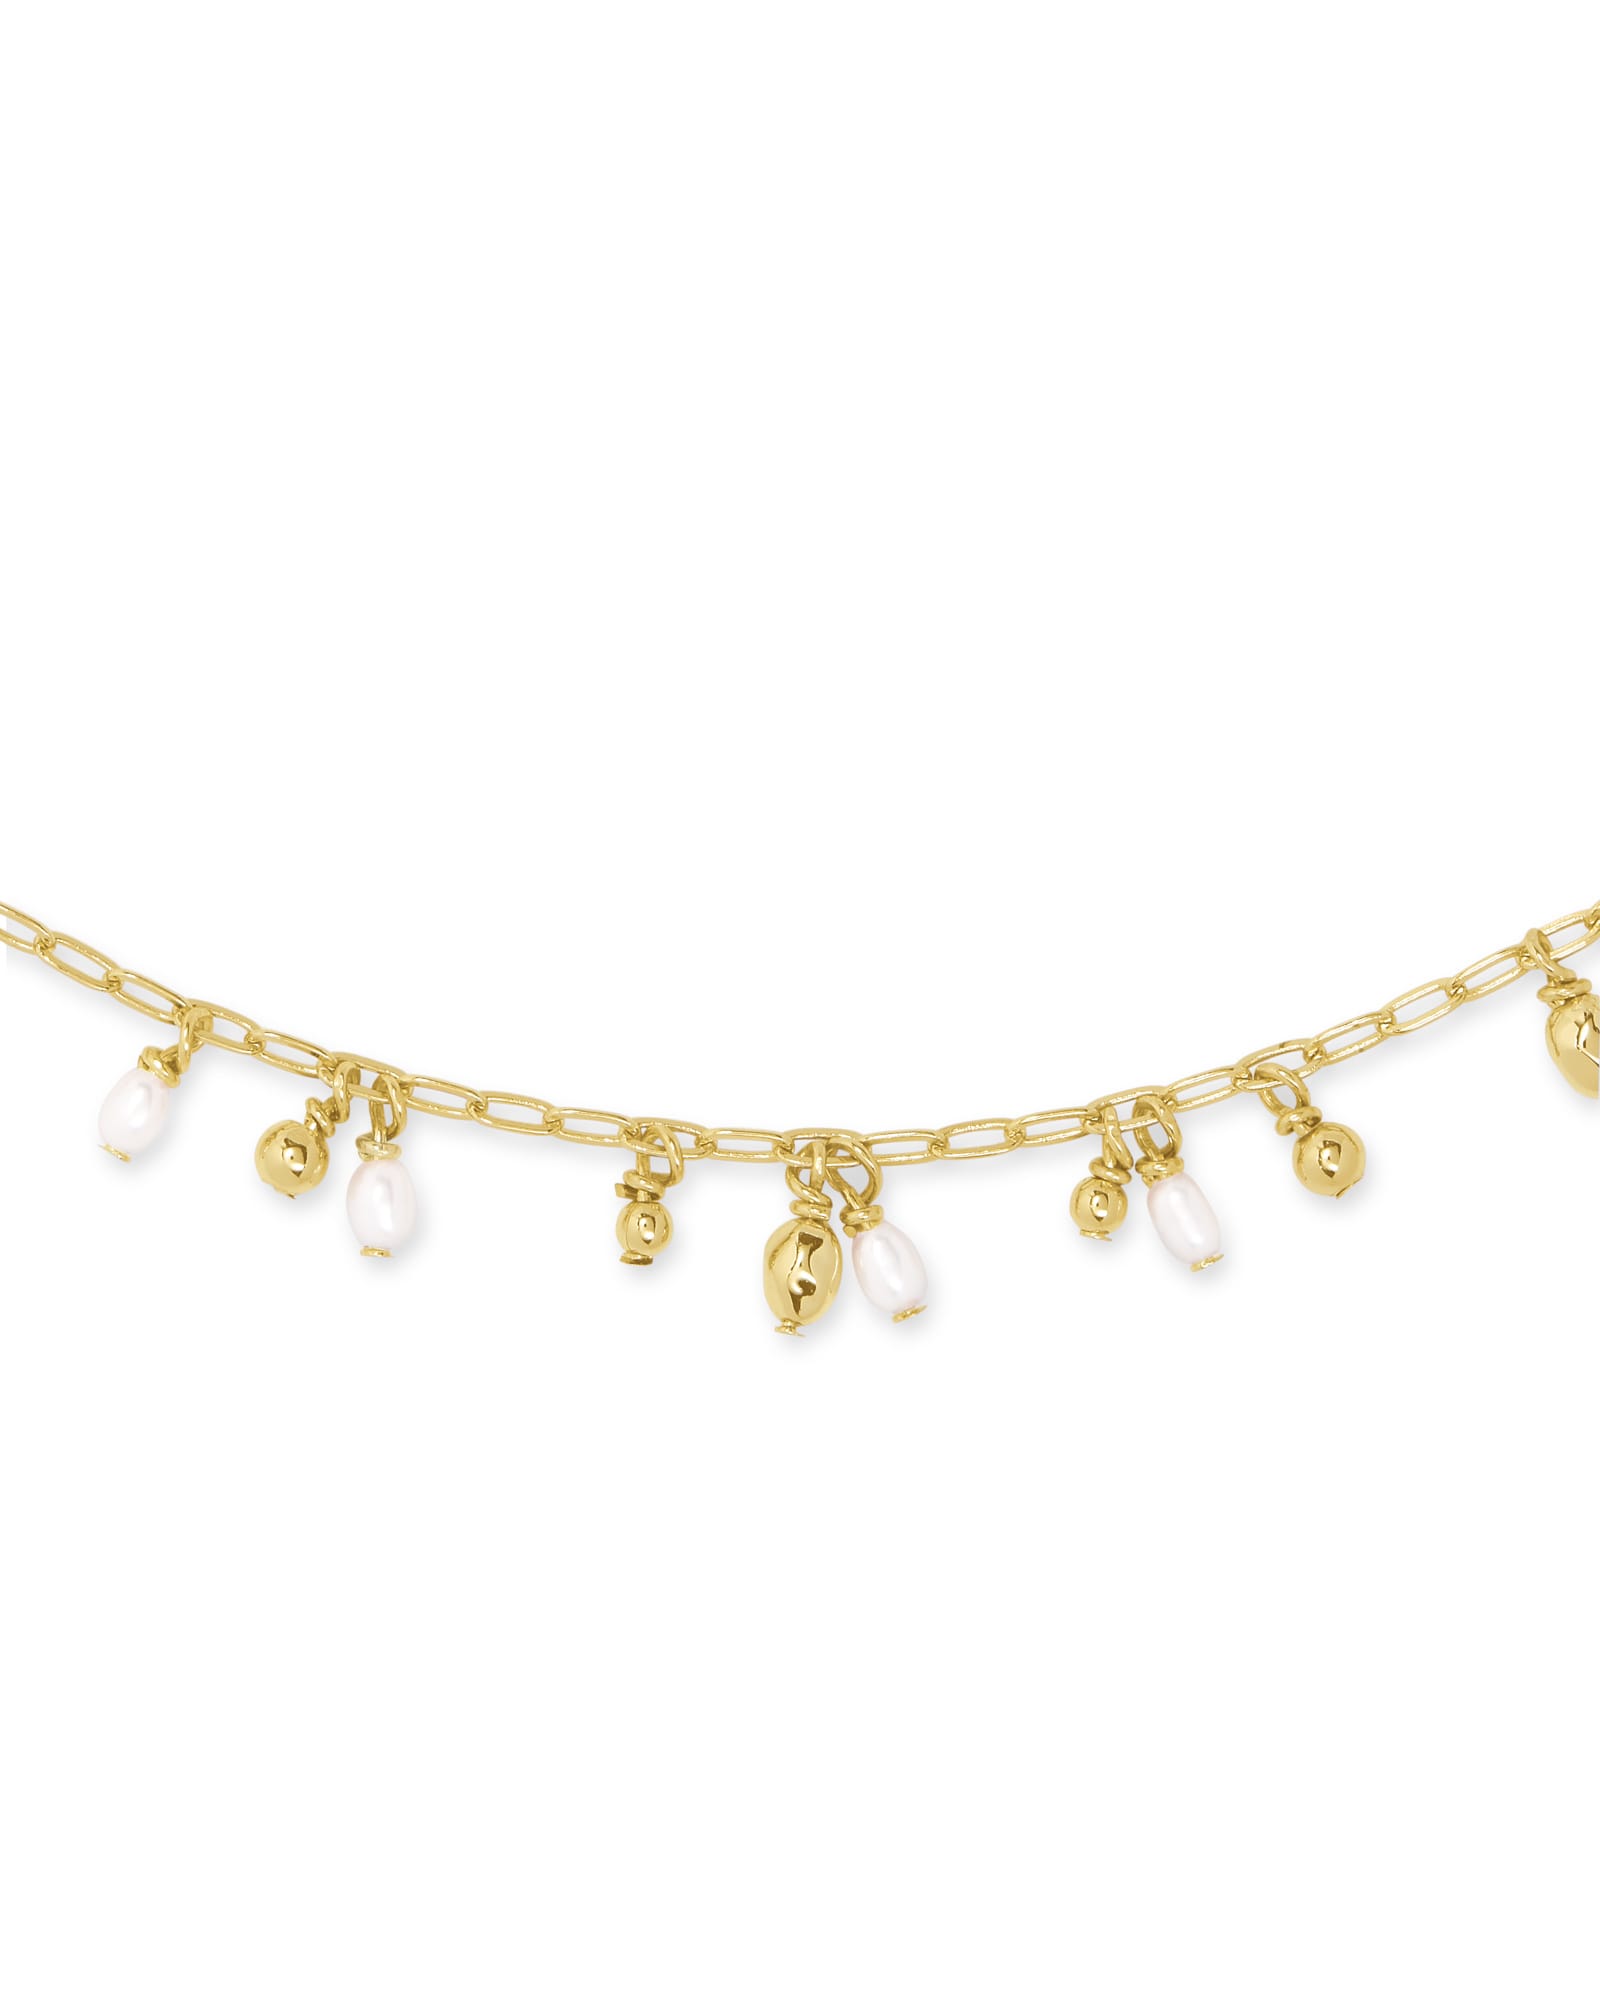 Mollie Gold Choker Necklace in White Pearl